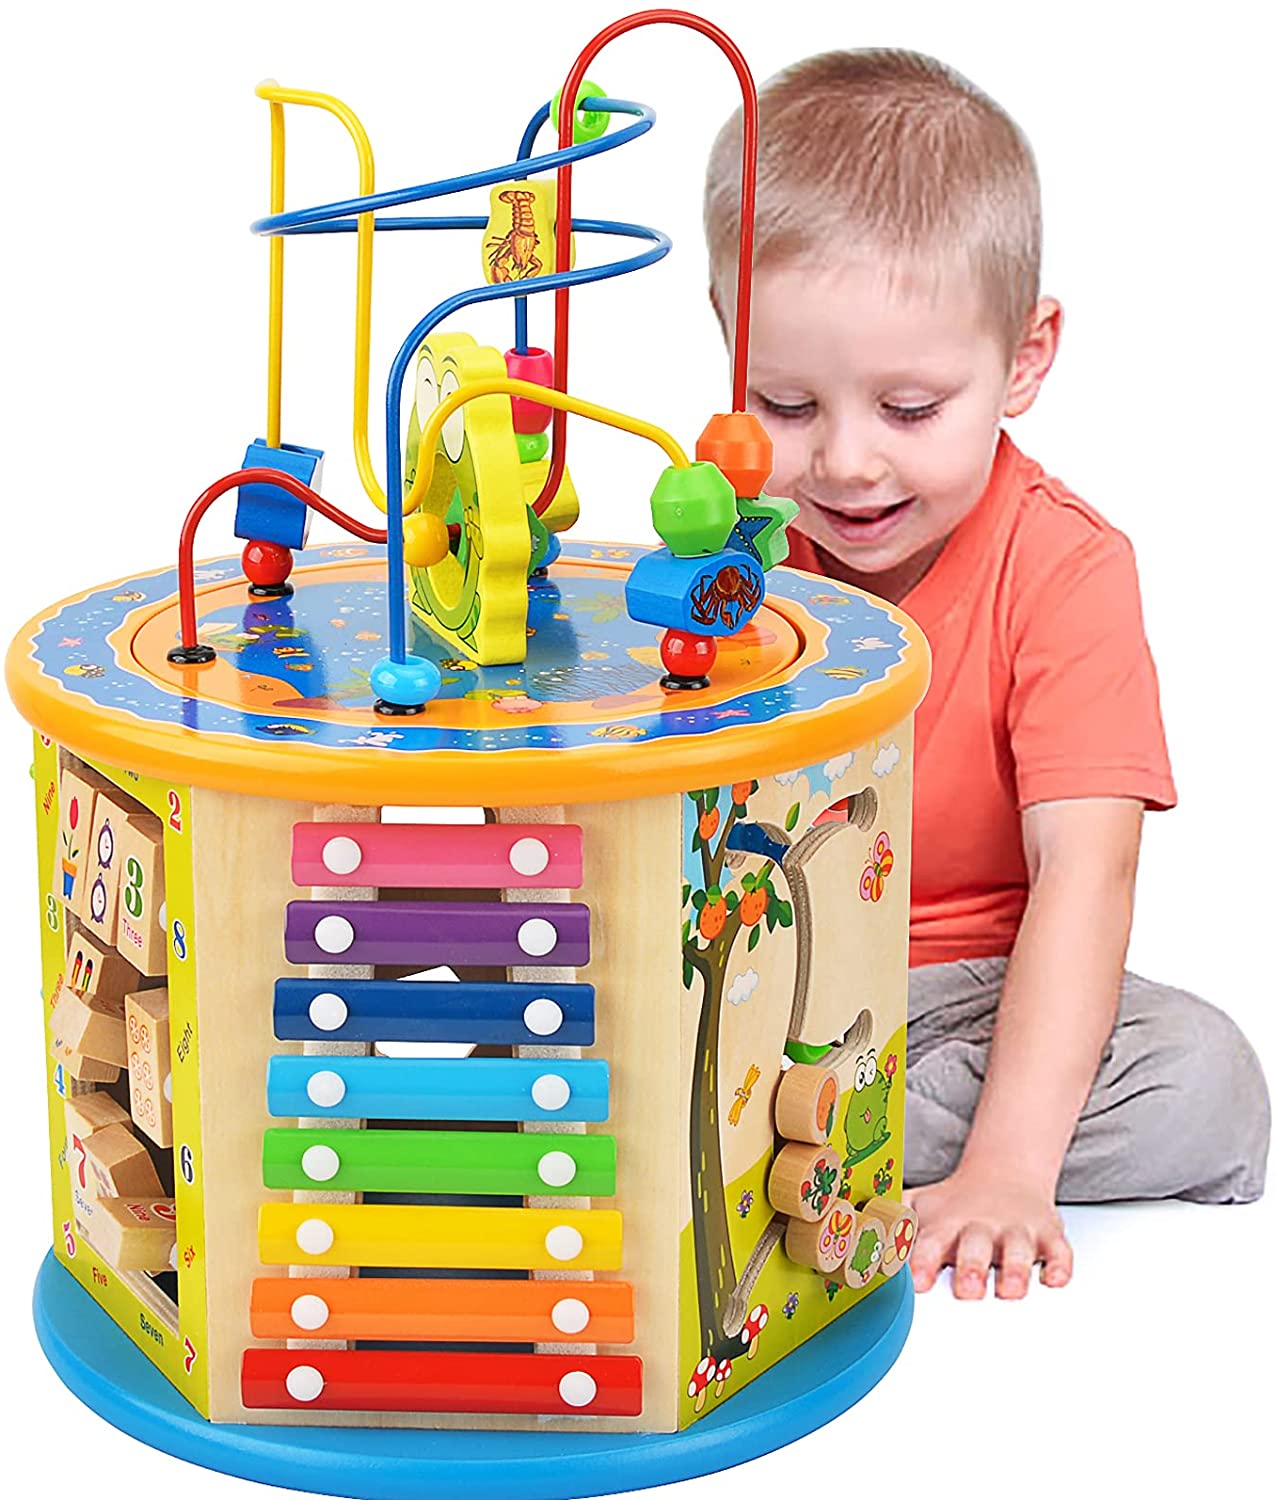 6 Games Colorful Wooden Play Cube Activity Center 8" Developmental Baby Toys New 